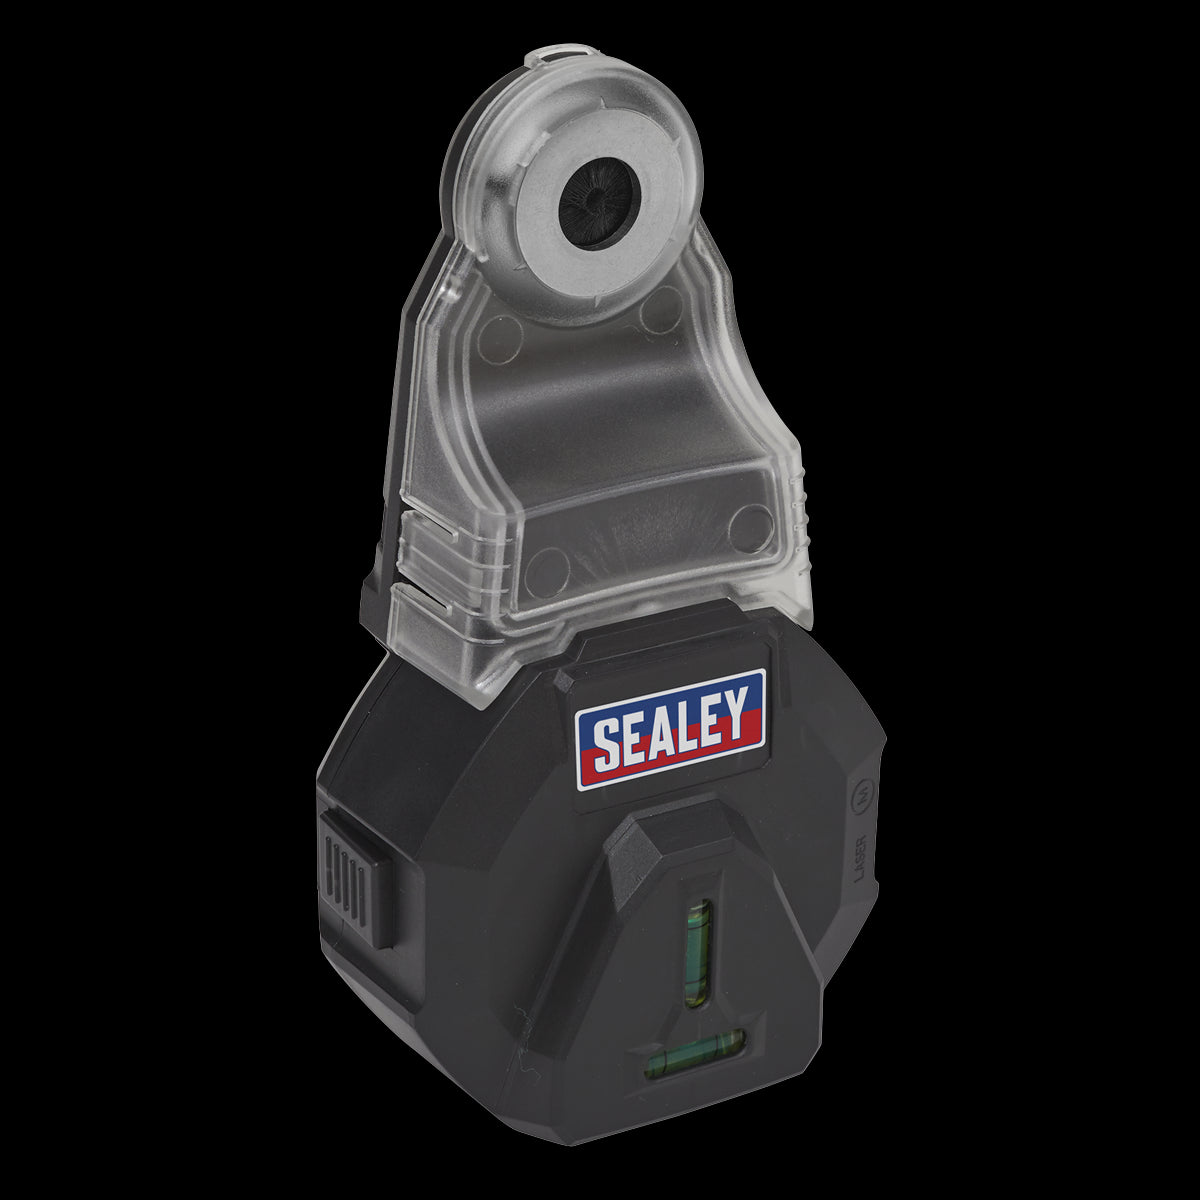 Sealey Vacuum Drill Dust Extractor 3V with Spirit Level and Laser Light